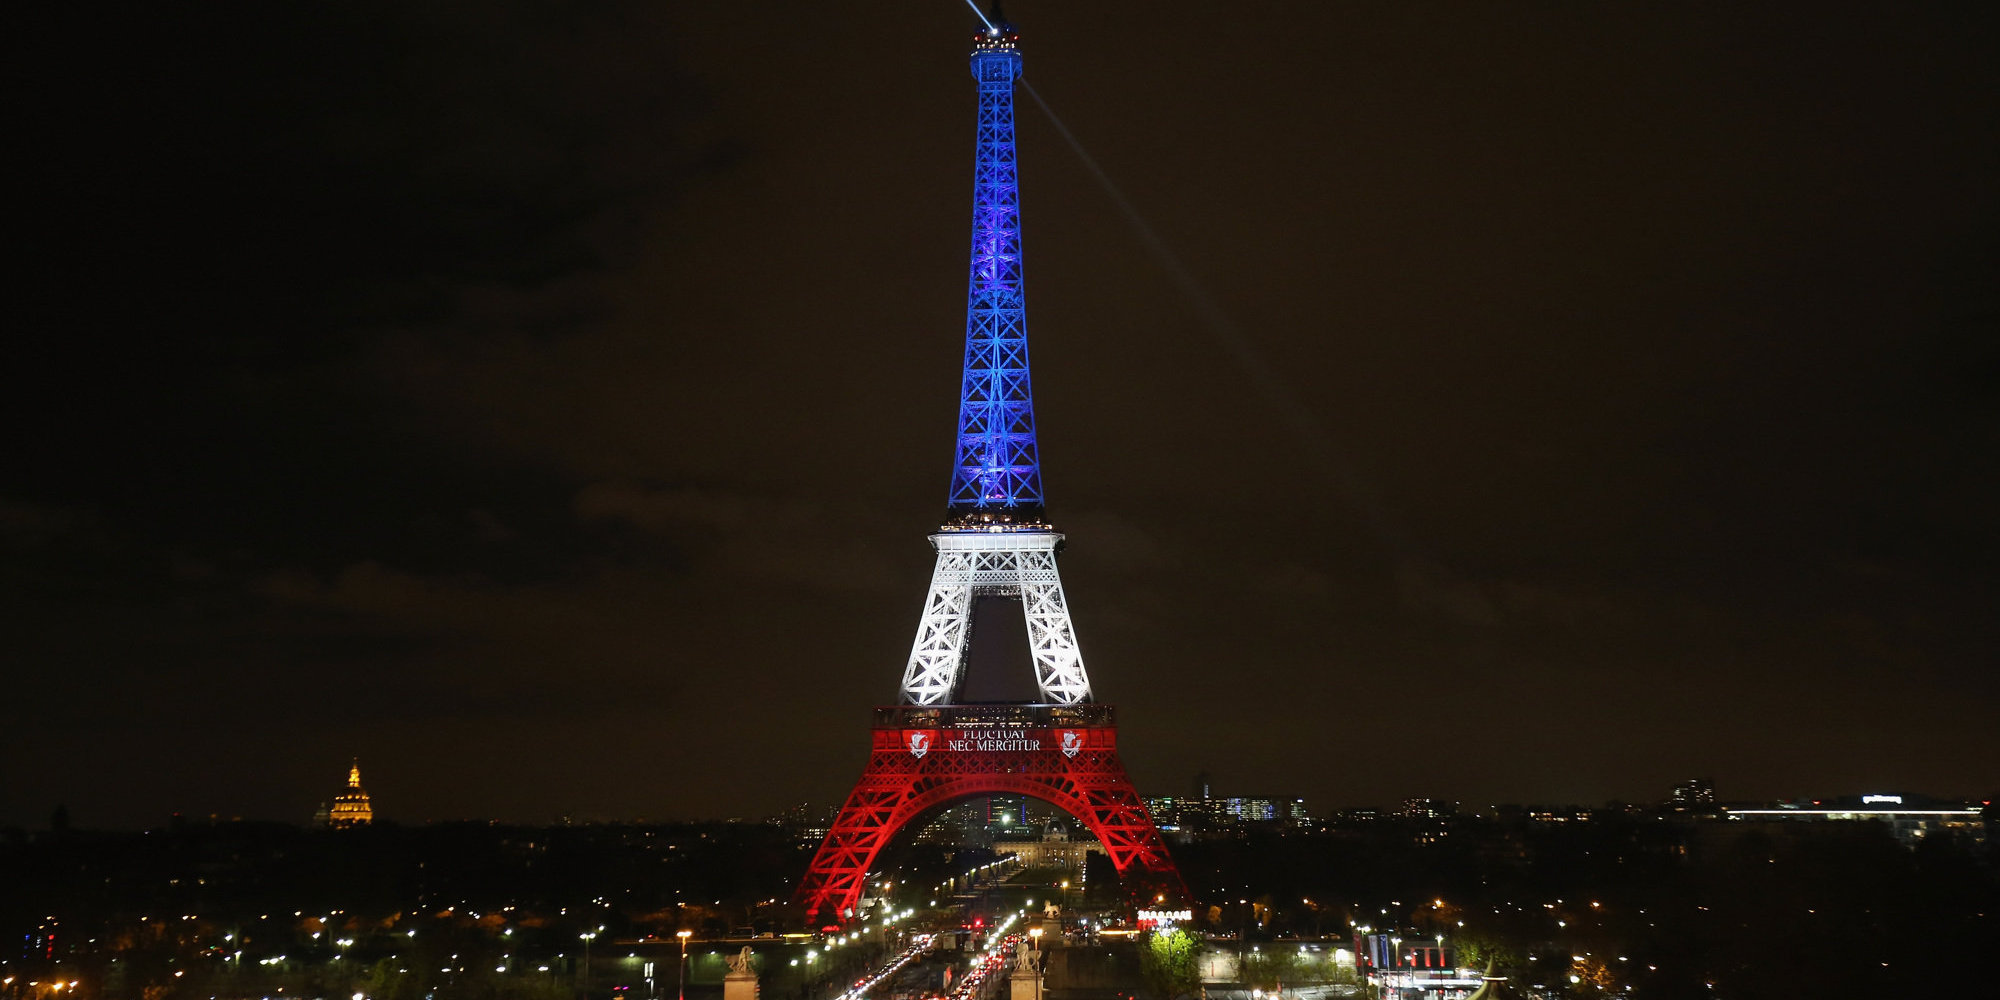 PARIS, FRANCE - NOVEMBER 16:  The Eiffel Tower is illuminated in Red, White and Blue in honour of the victims of Friday's terrorist attacks on November 16, 2015 in Paris, France. Countries across Europe joined France today to observe a one minute-silence in an expression of solidarity with the victims of the terrorist attacks, which left at least 129 people dead and hundreds more injured.  (Photo by Christopher Furlong/Getty Images)